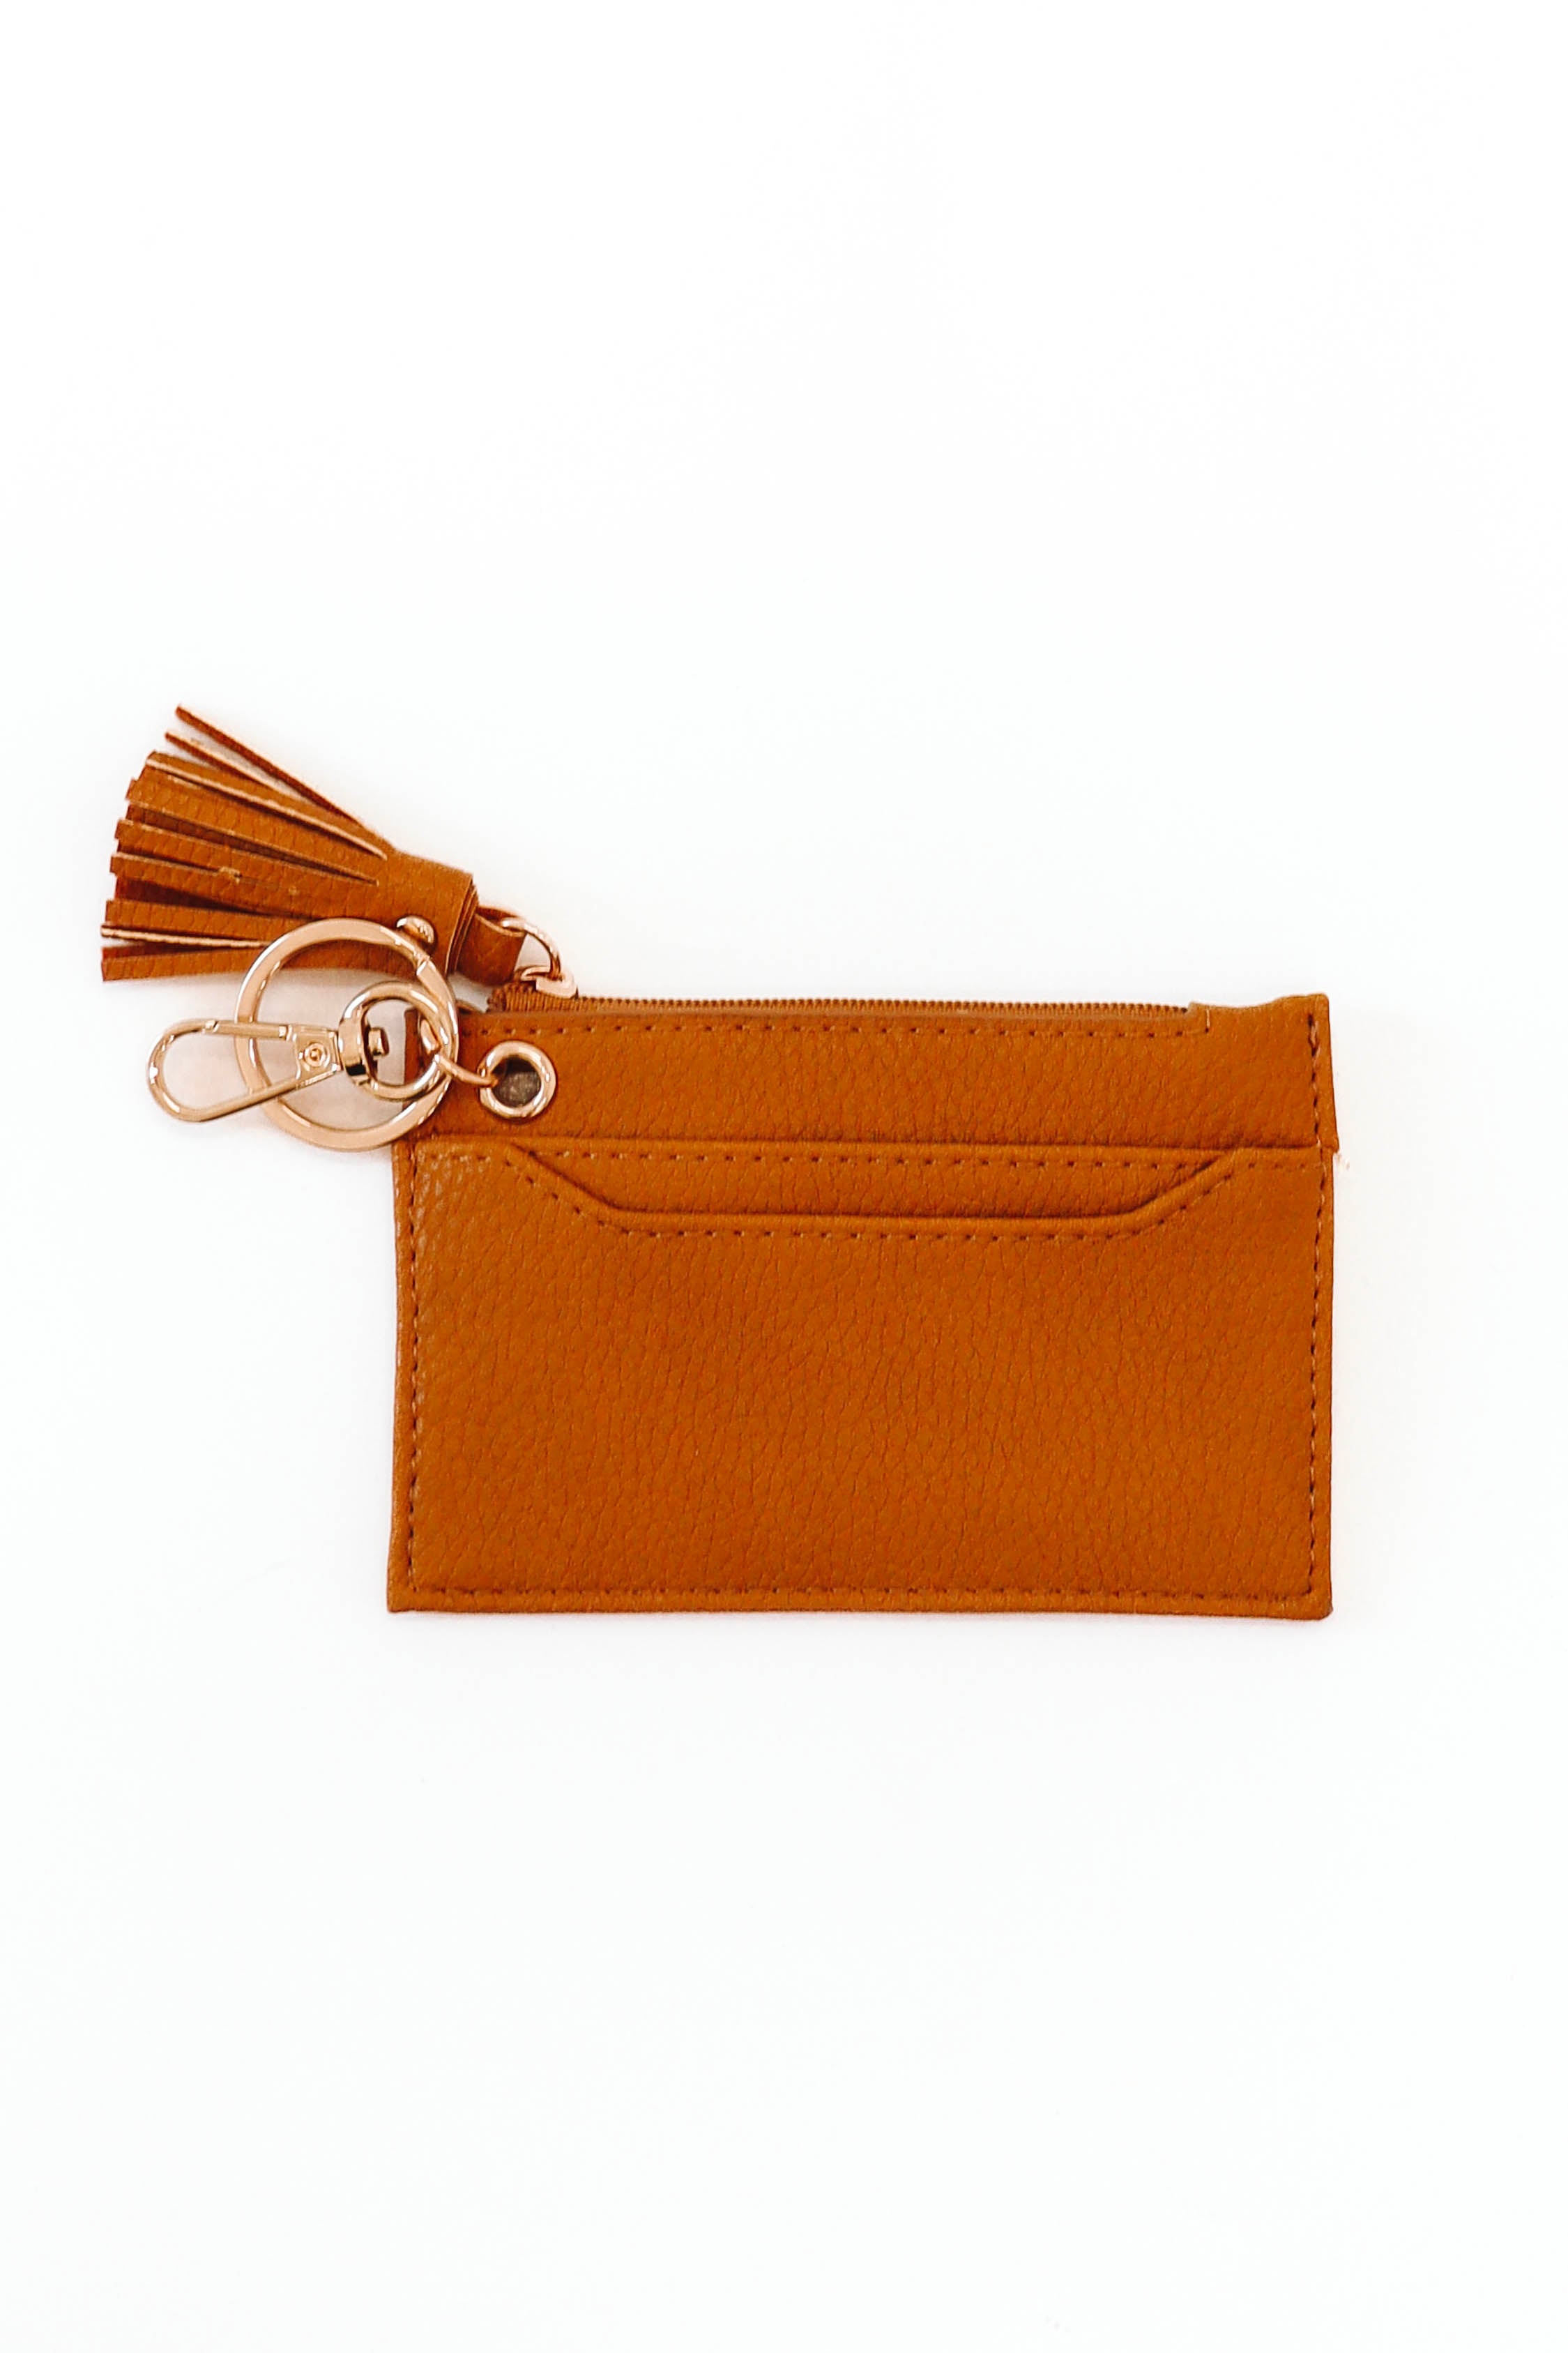 Faux Leather Card/Coin Key Chain Wallet